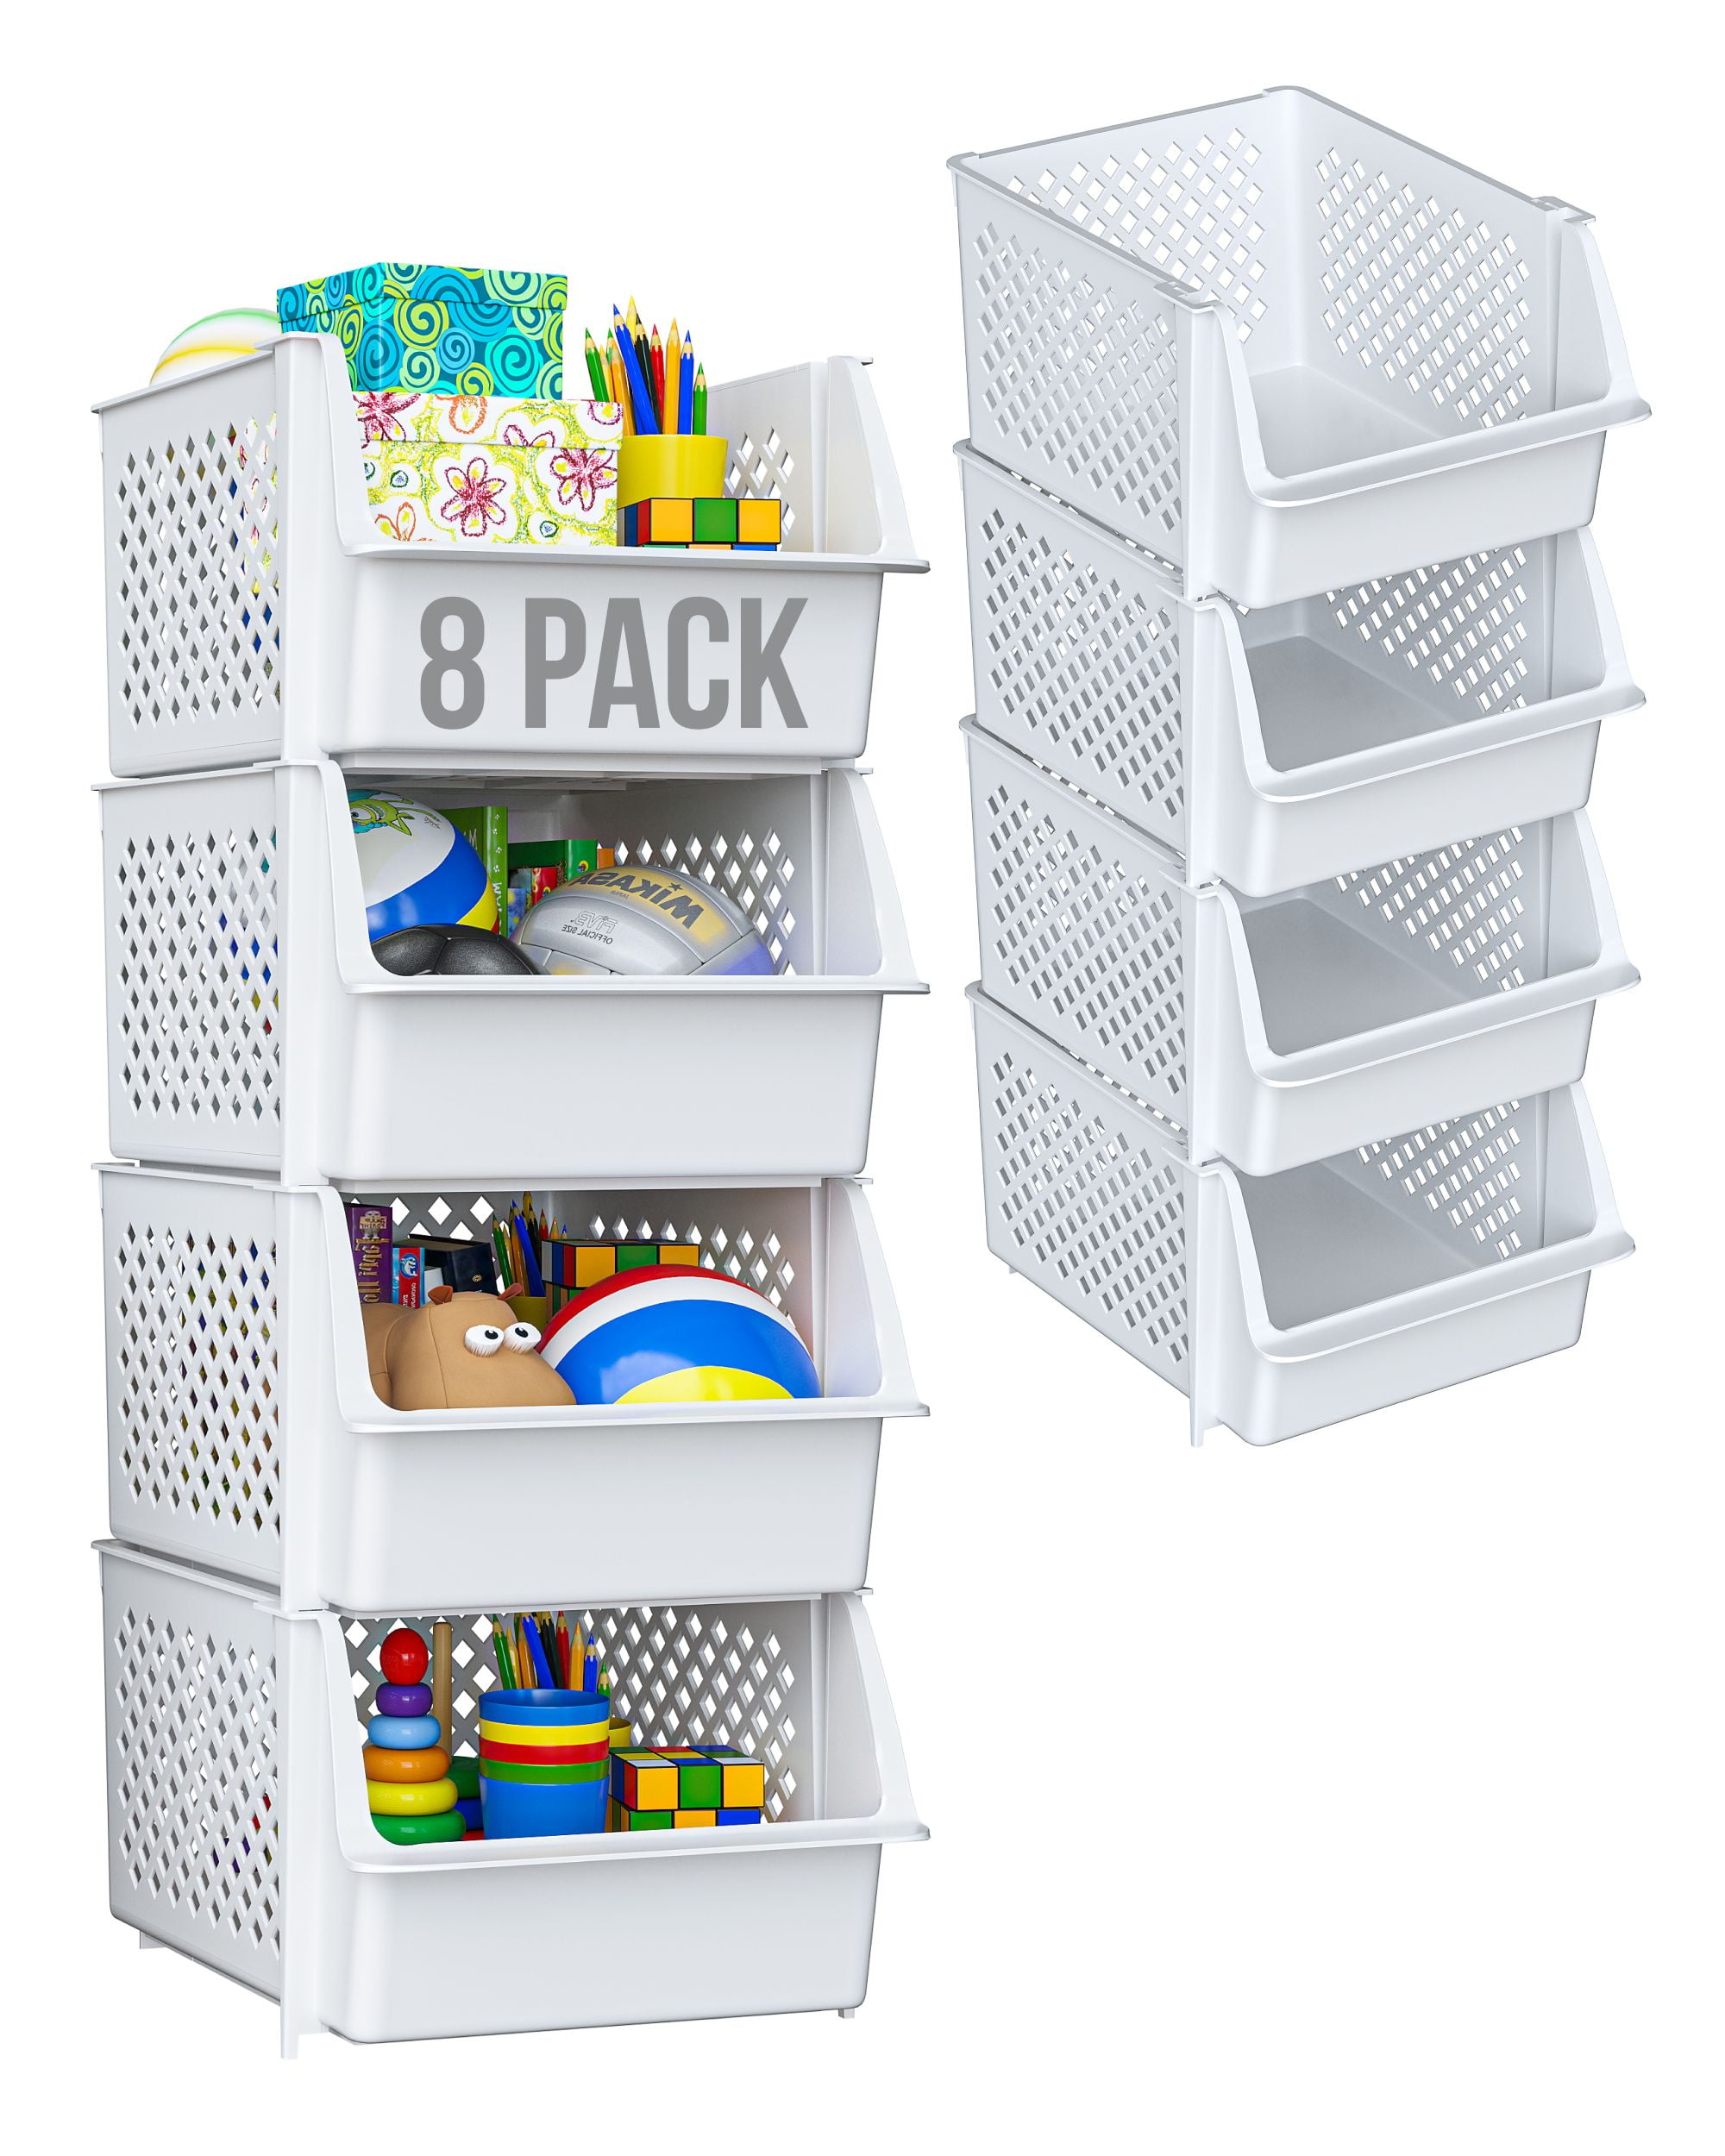 Skywin Plastic Stackable Storage Bins for Pantry - Stackable Bins For  Organizing Food, Kitchen, and Bathroom Essentials (Random - 8 Pack) 